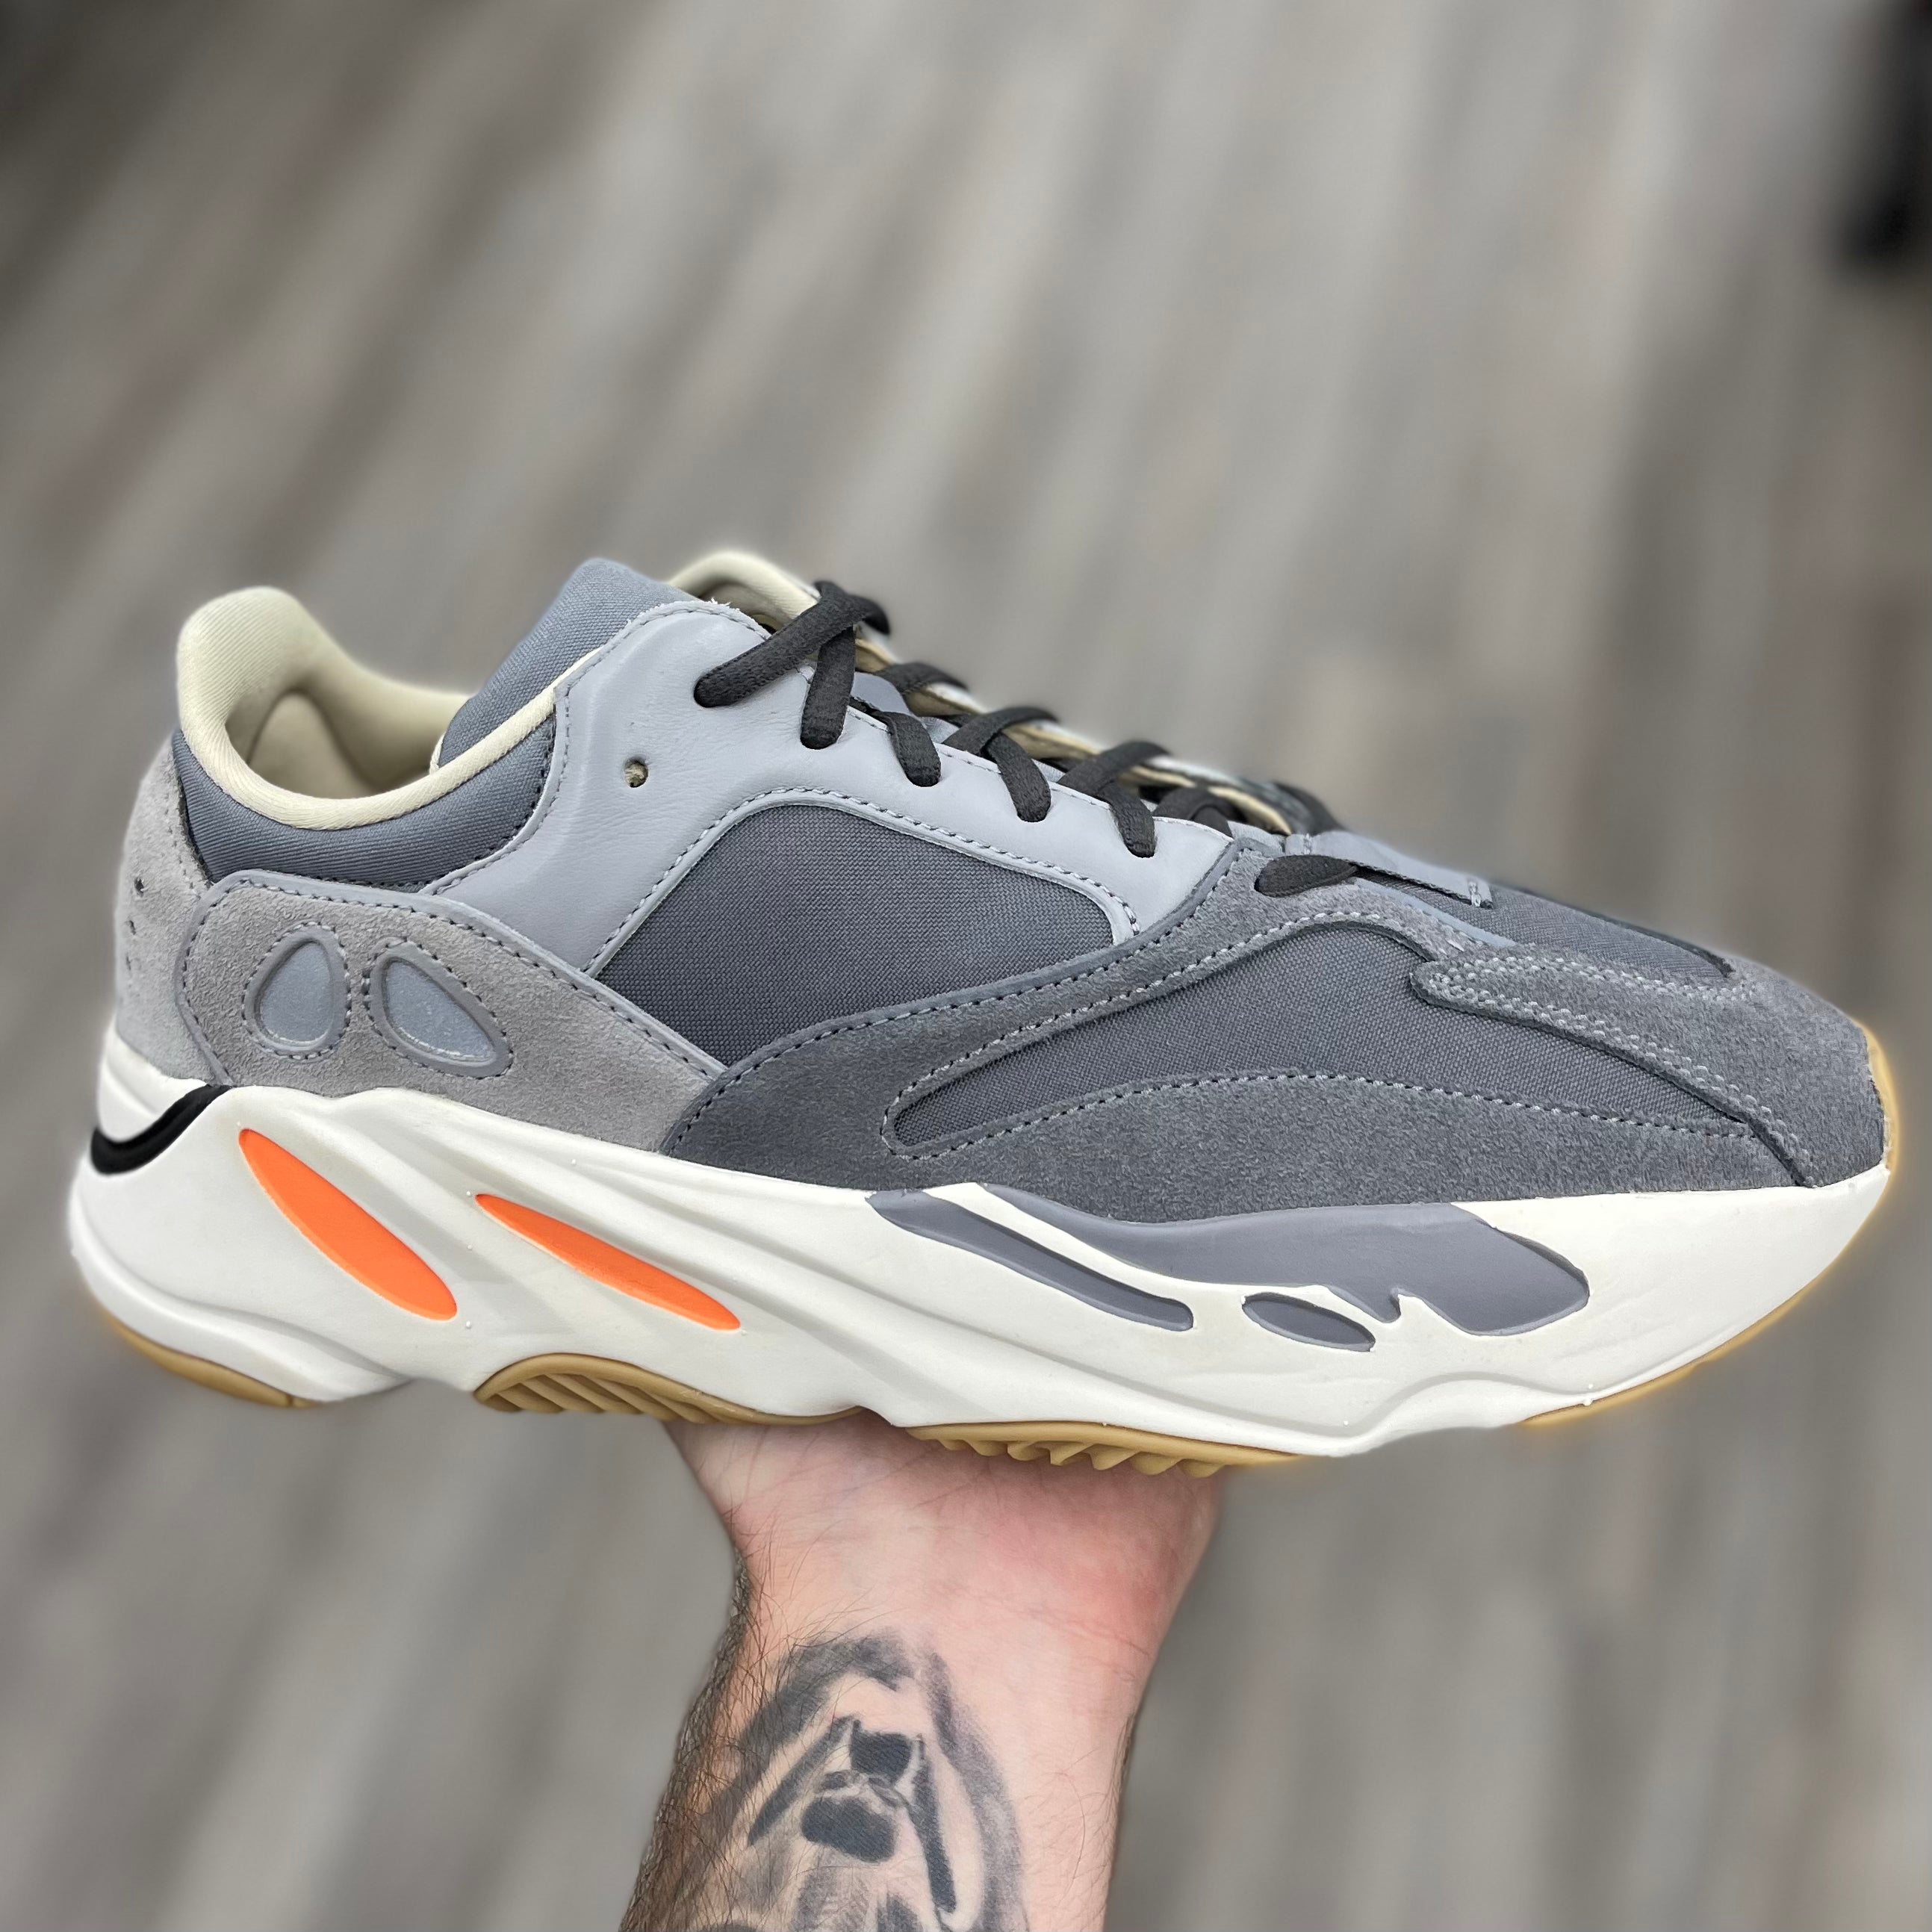 Adidas Yeezy Boost 700 “Magnet” | Request